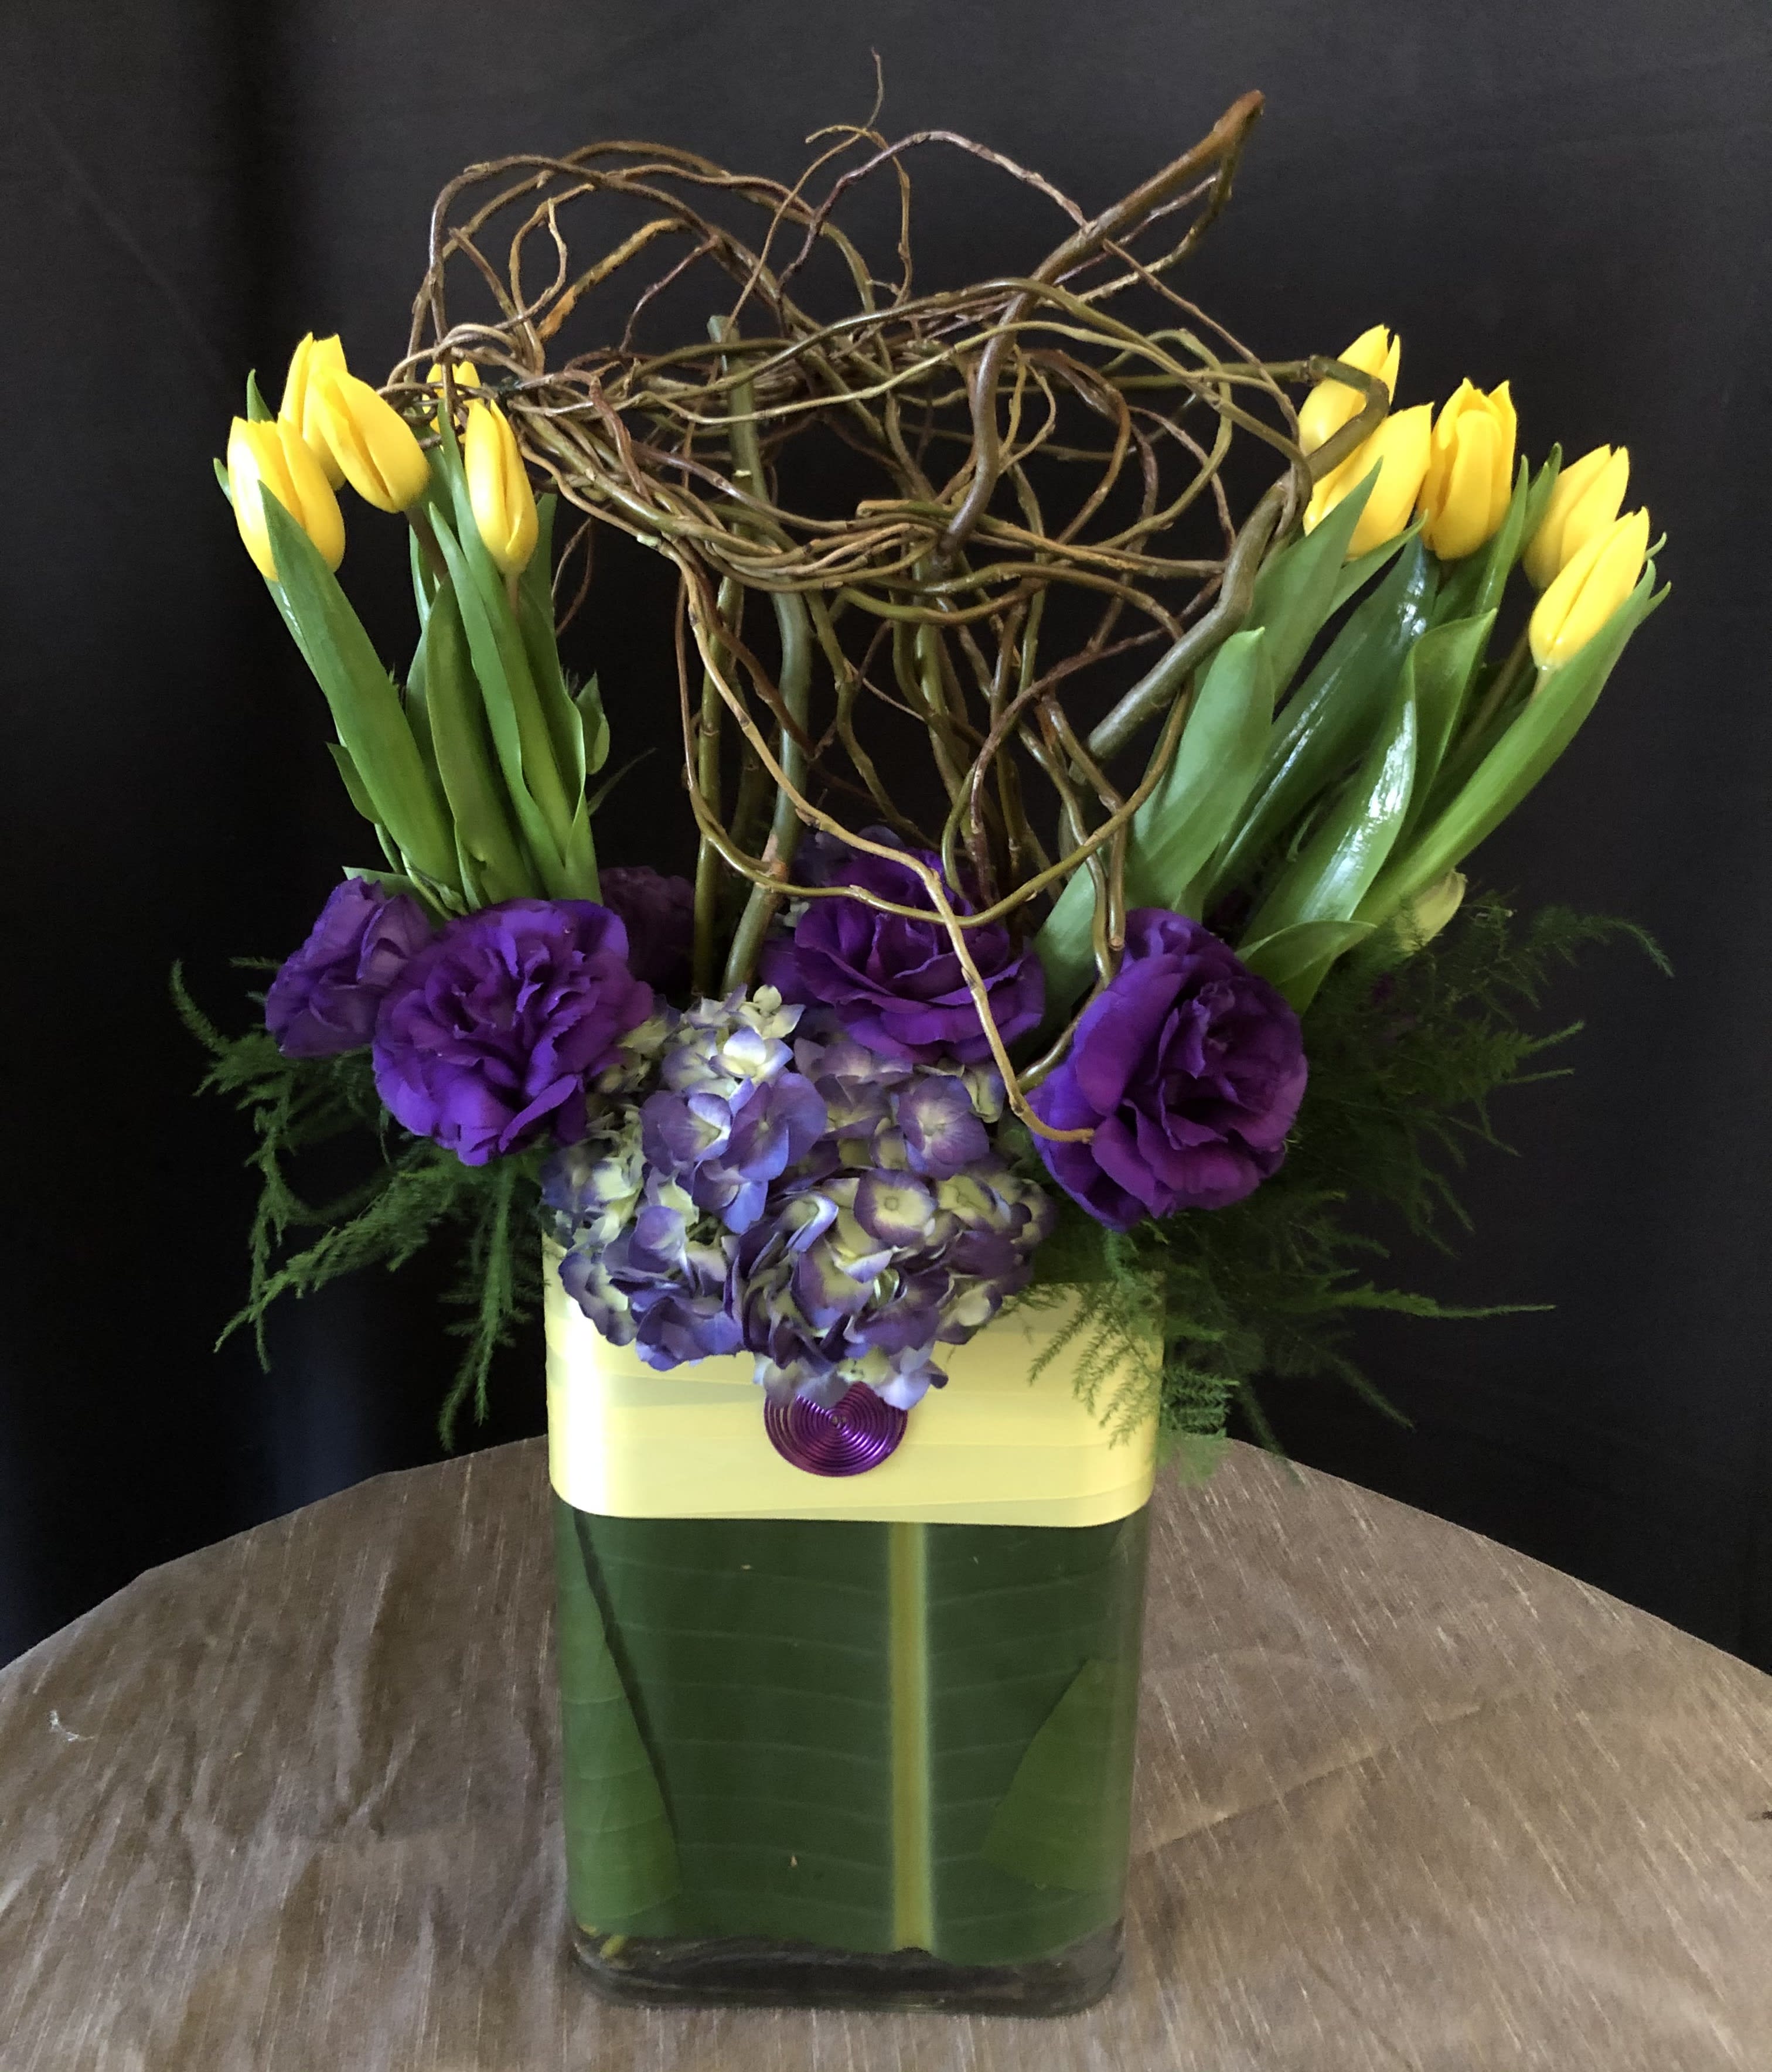 Floral Hug #EF72 - Uniquely wived Willow , Tulips to hug them, purple lisianthus &amp;  Hydrangea to complete  Designers vision . Of course you can choose your desire color combination &amp; Flowers  